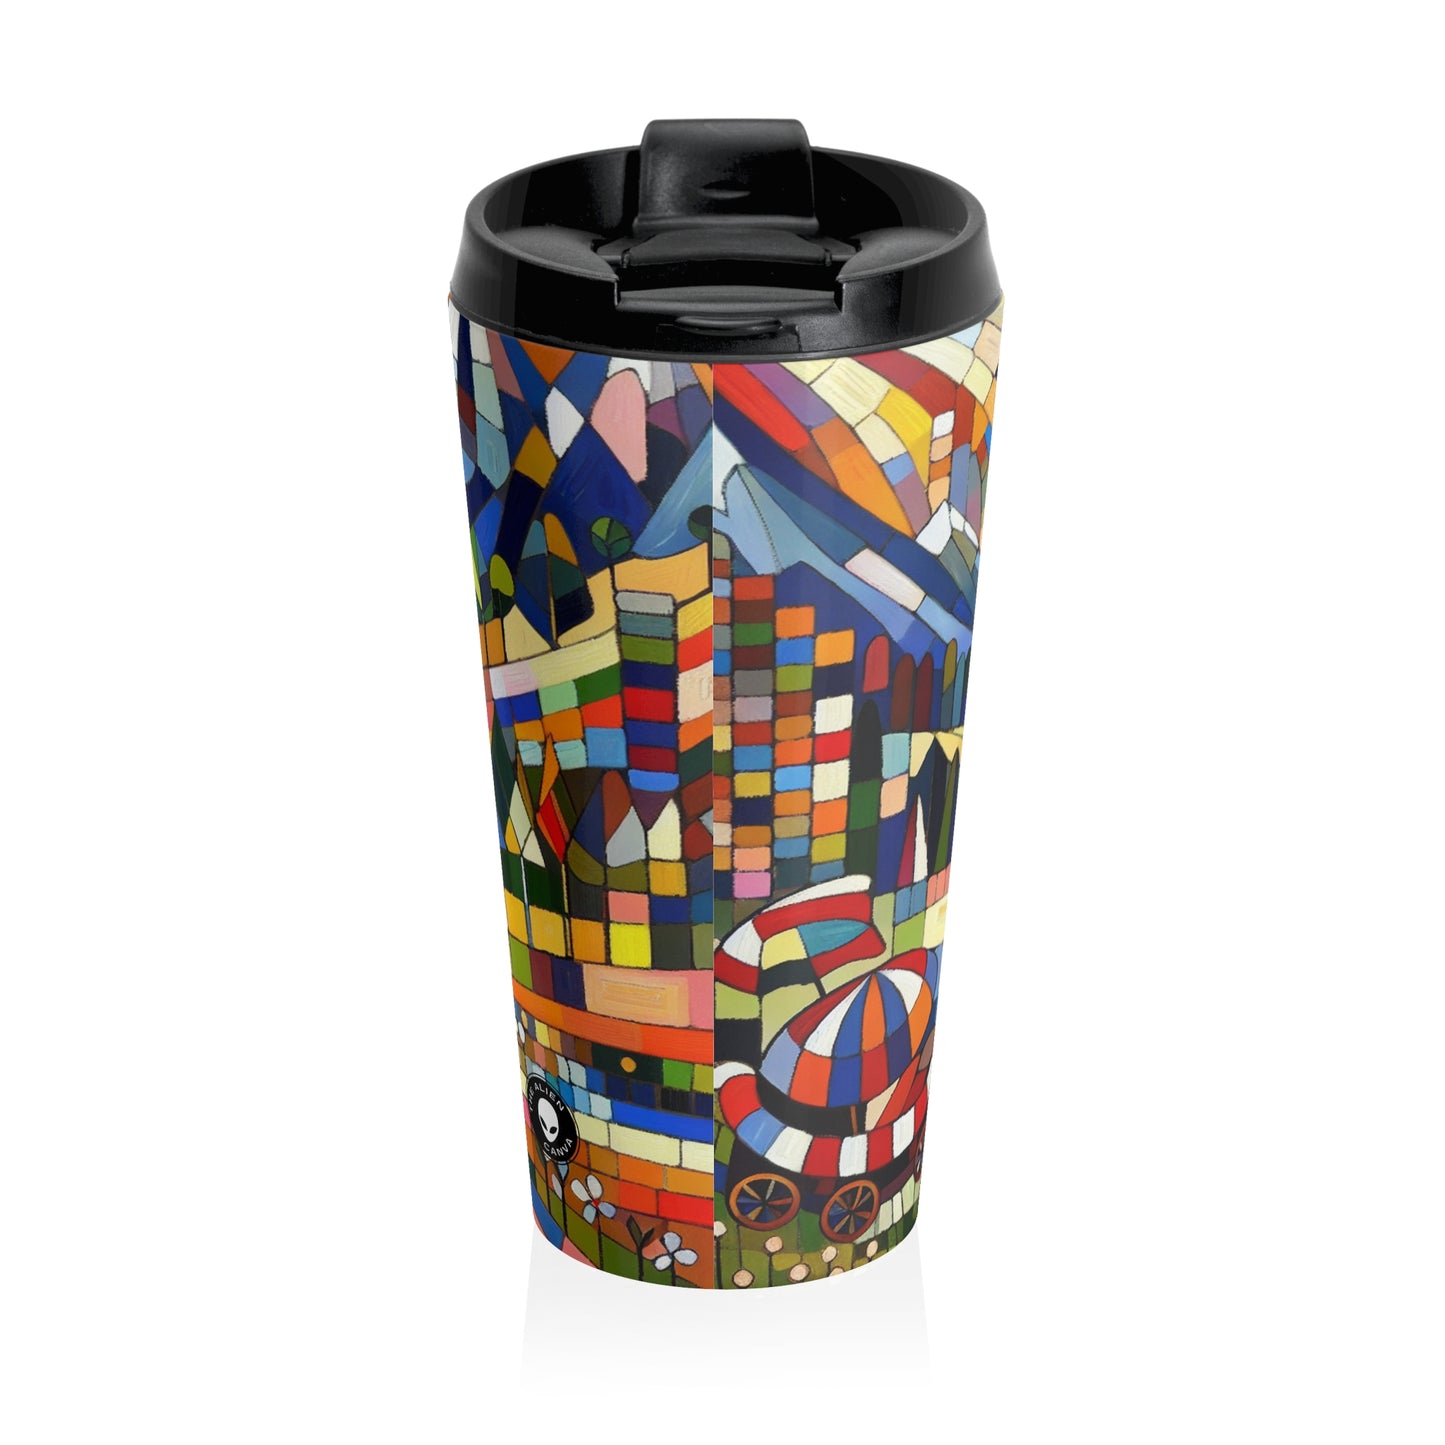 "Picnic Party in the Meadow" - The Alien Stainless Steel Travel Mug Naïve Art